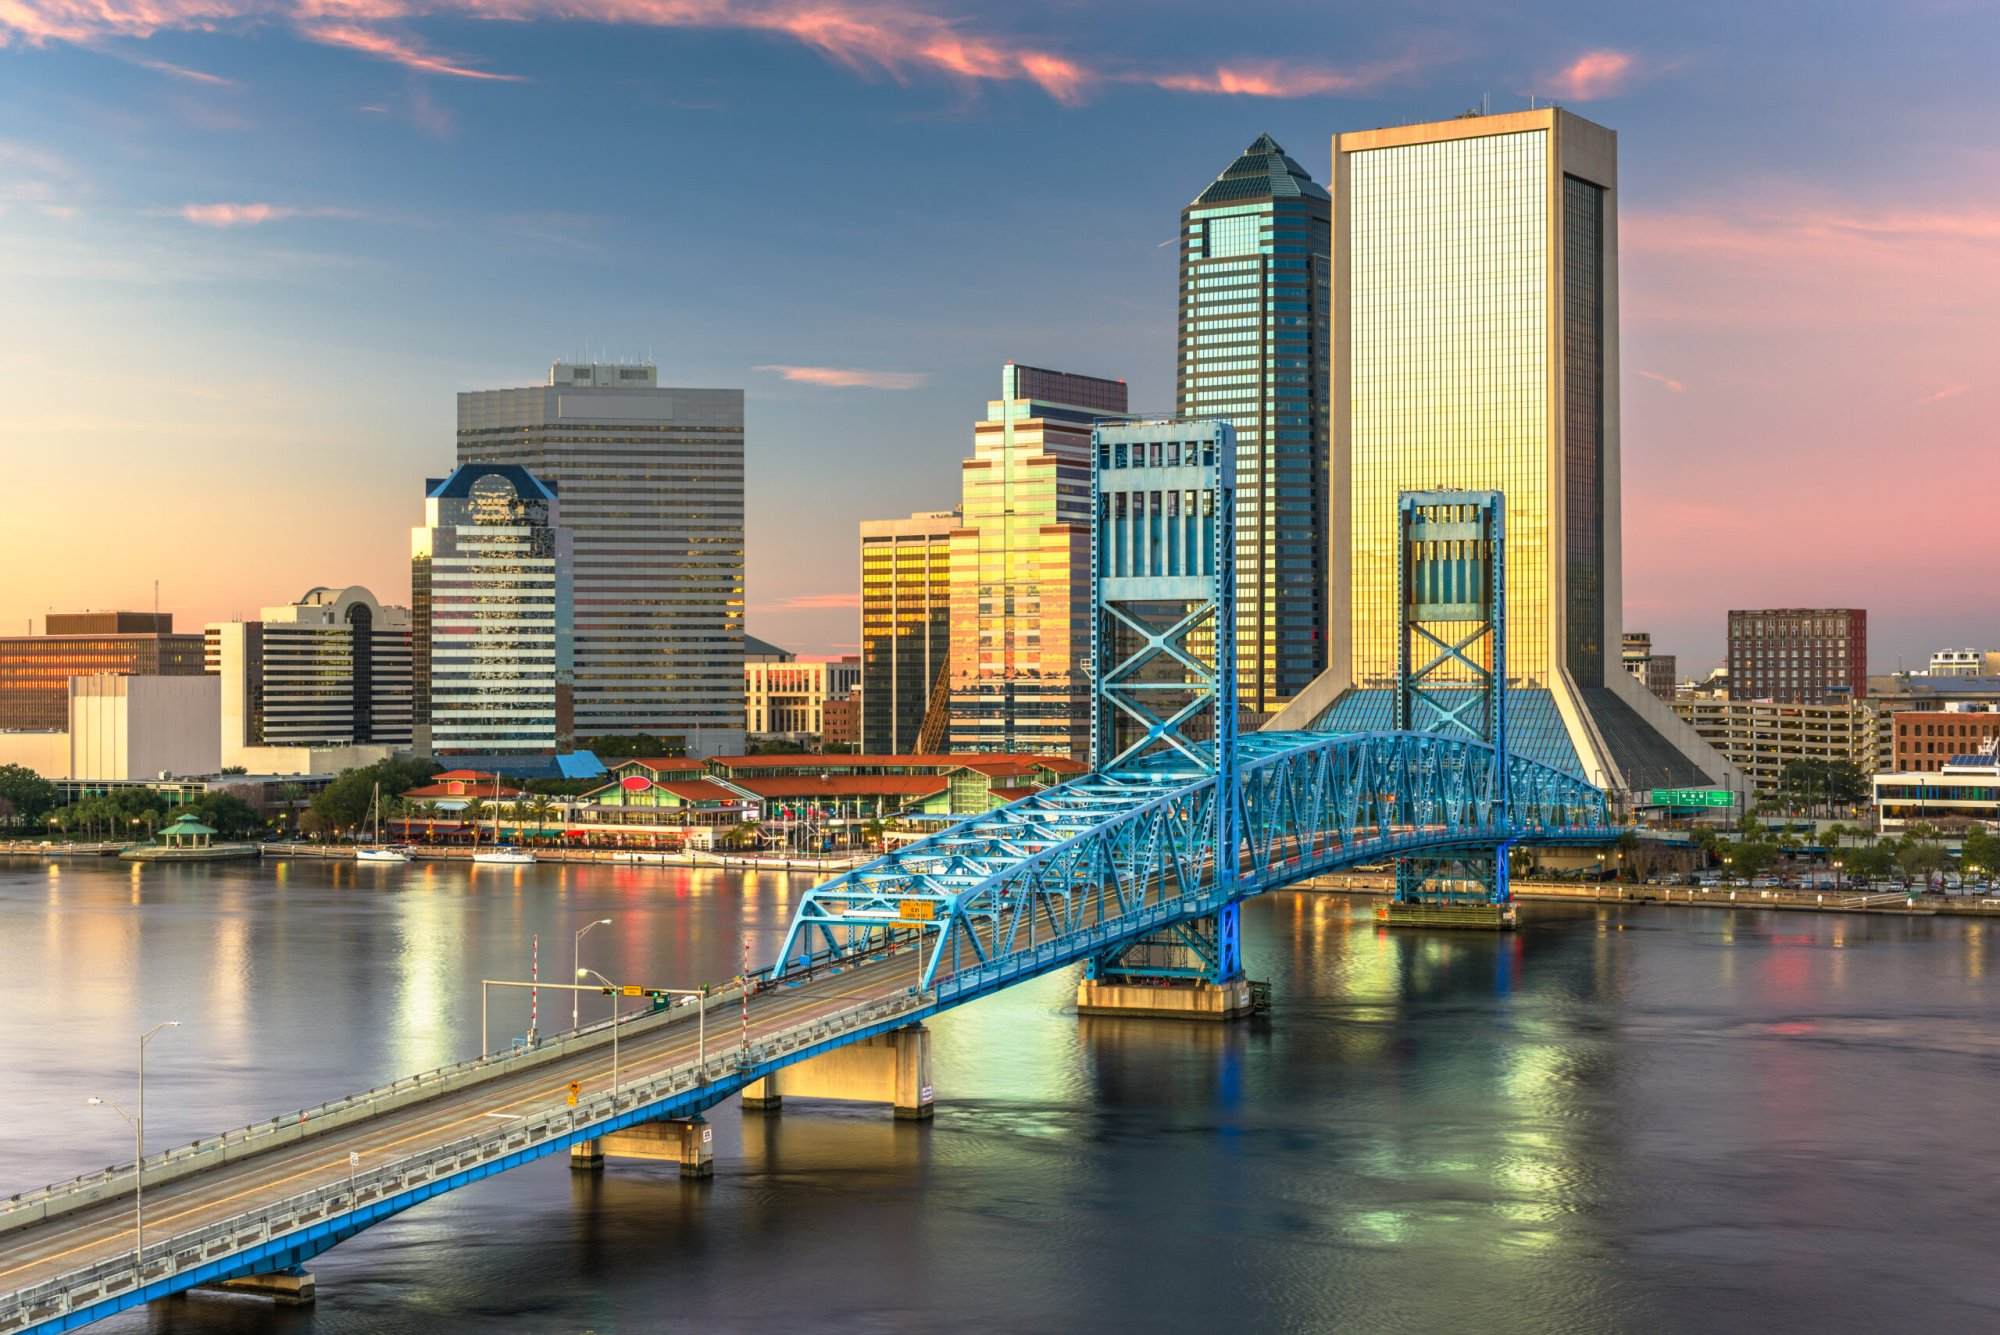 The skyline of tampa, florida at sunset.